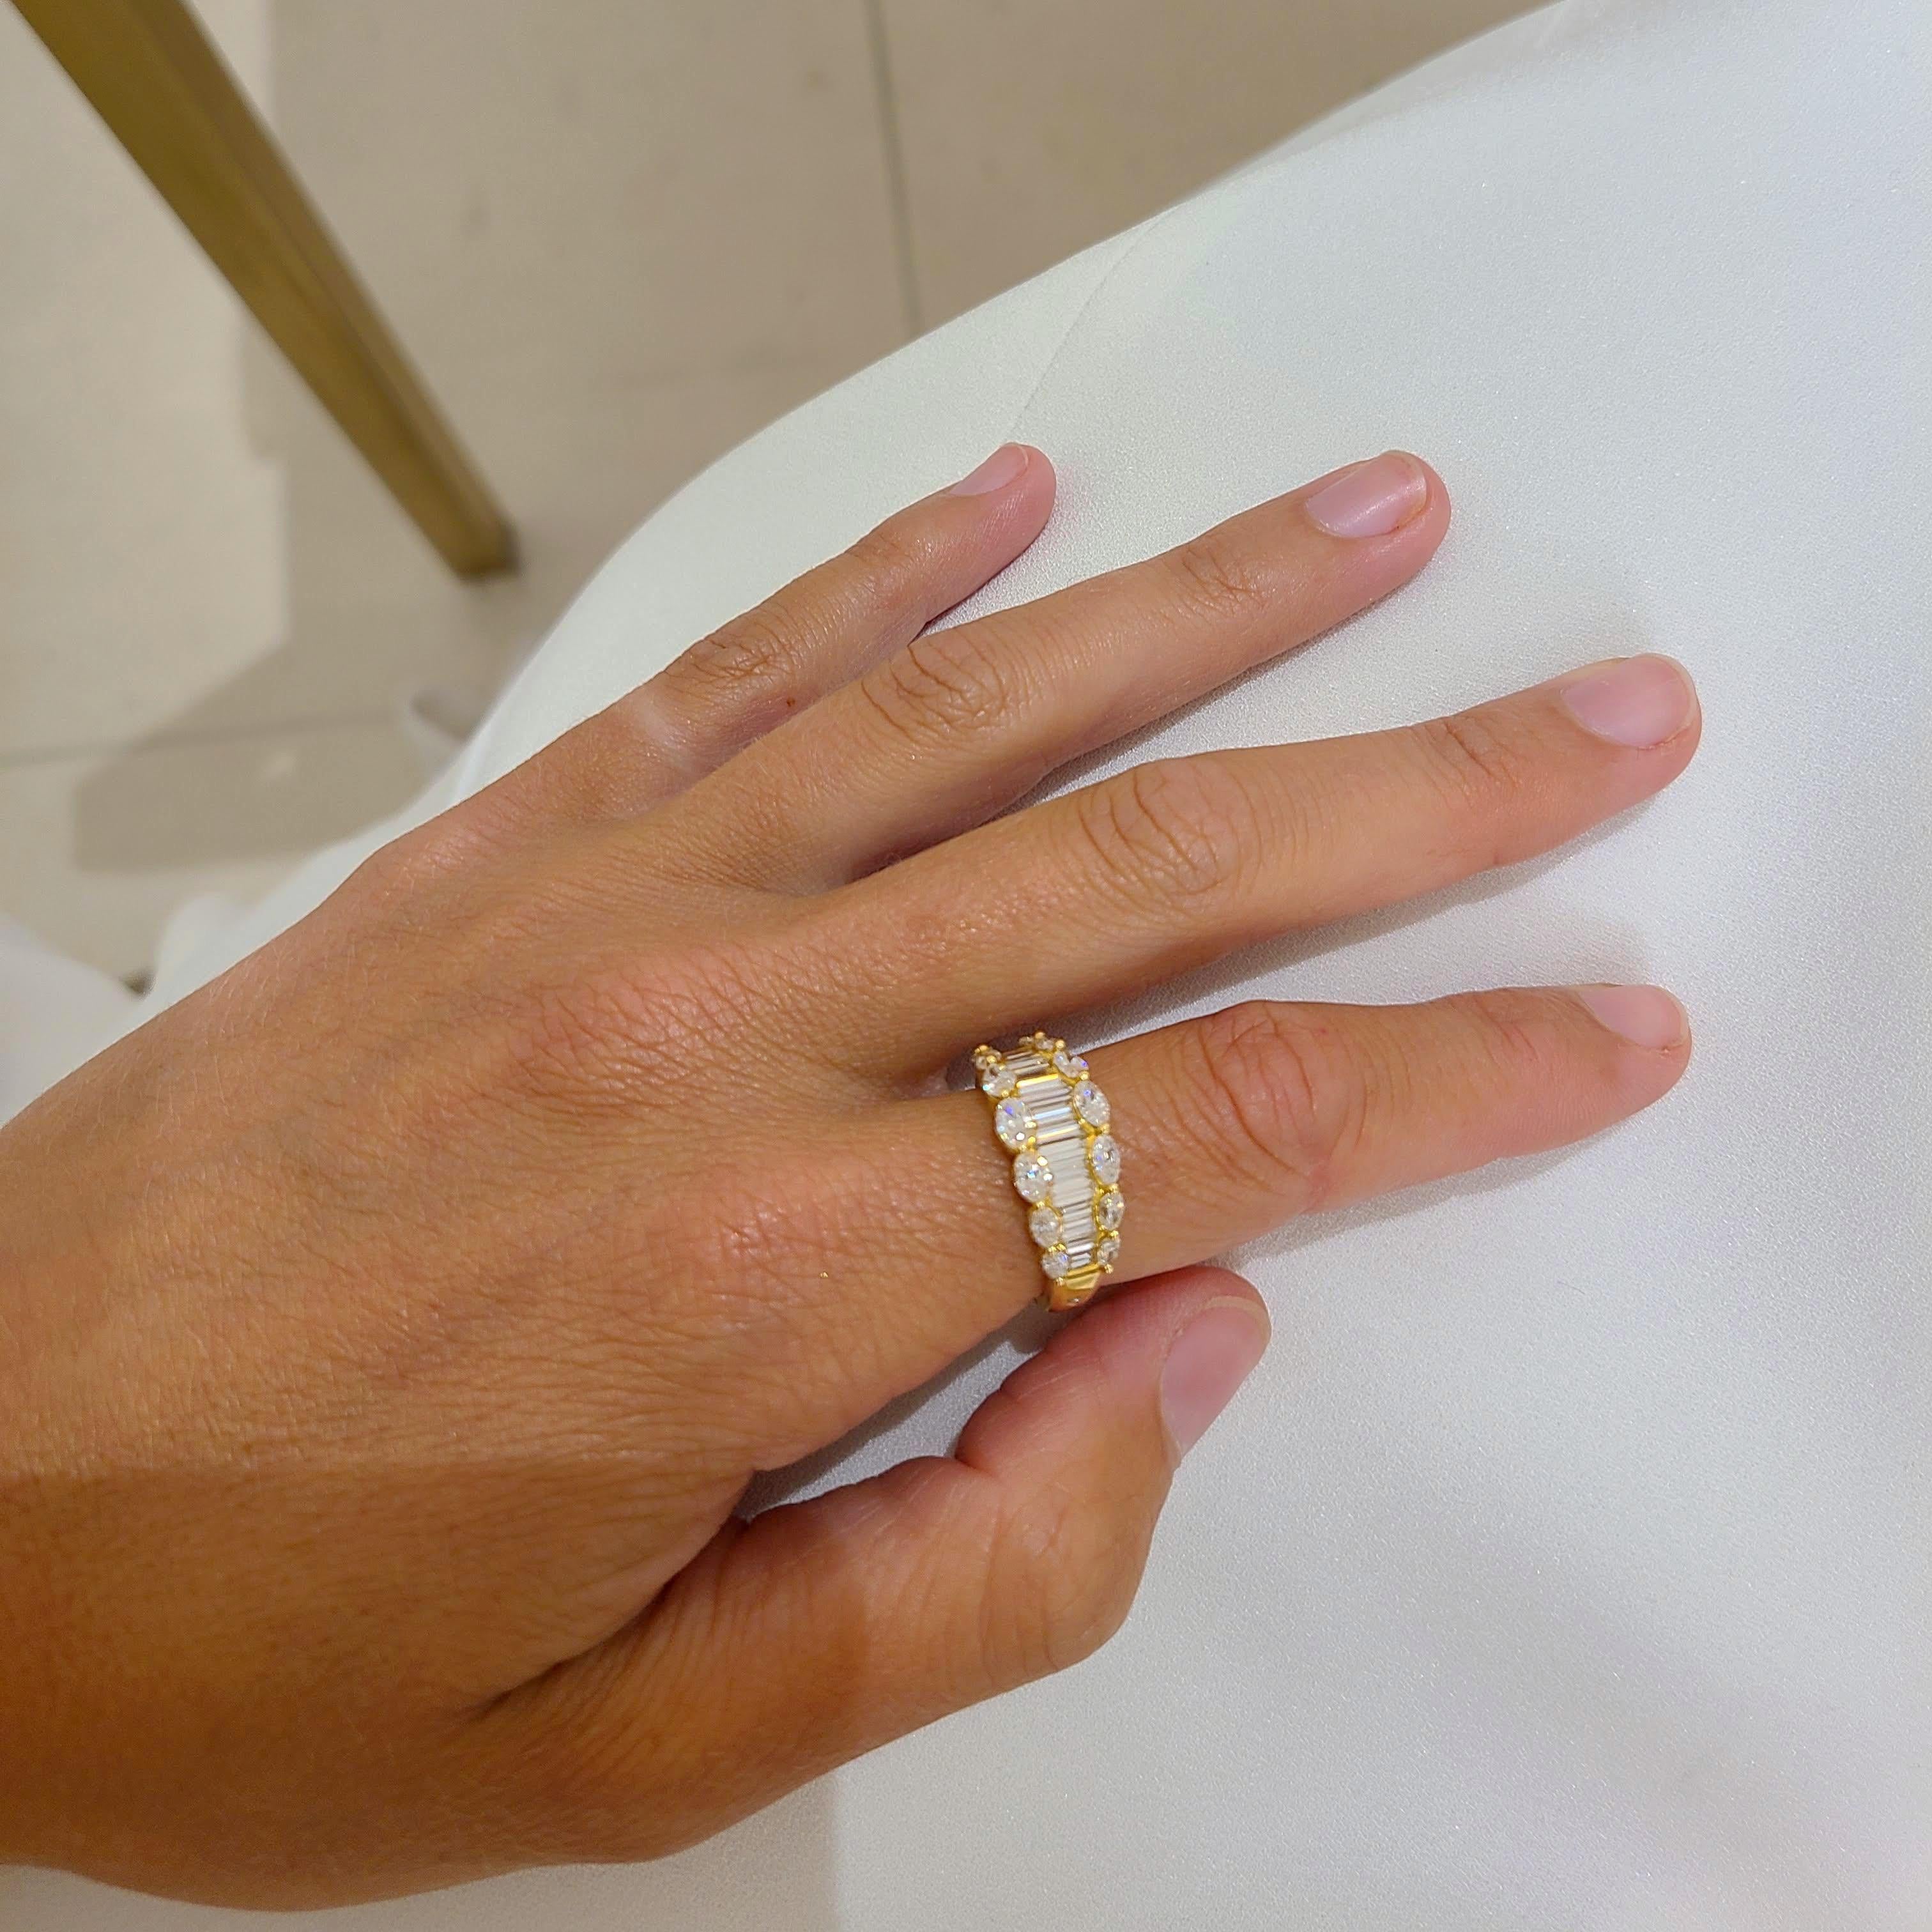 Beautiful 18 karat yellow gold ring set with Baguette and Marquise cut Diamonds. The Baguettes are set vertically, and the Marquise are set horizontally. The diamonds taper slightly for a lovely look on the finger. There is a round Diamond set in a